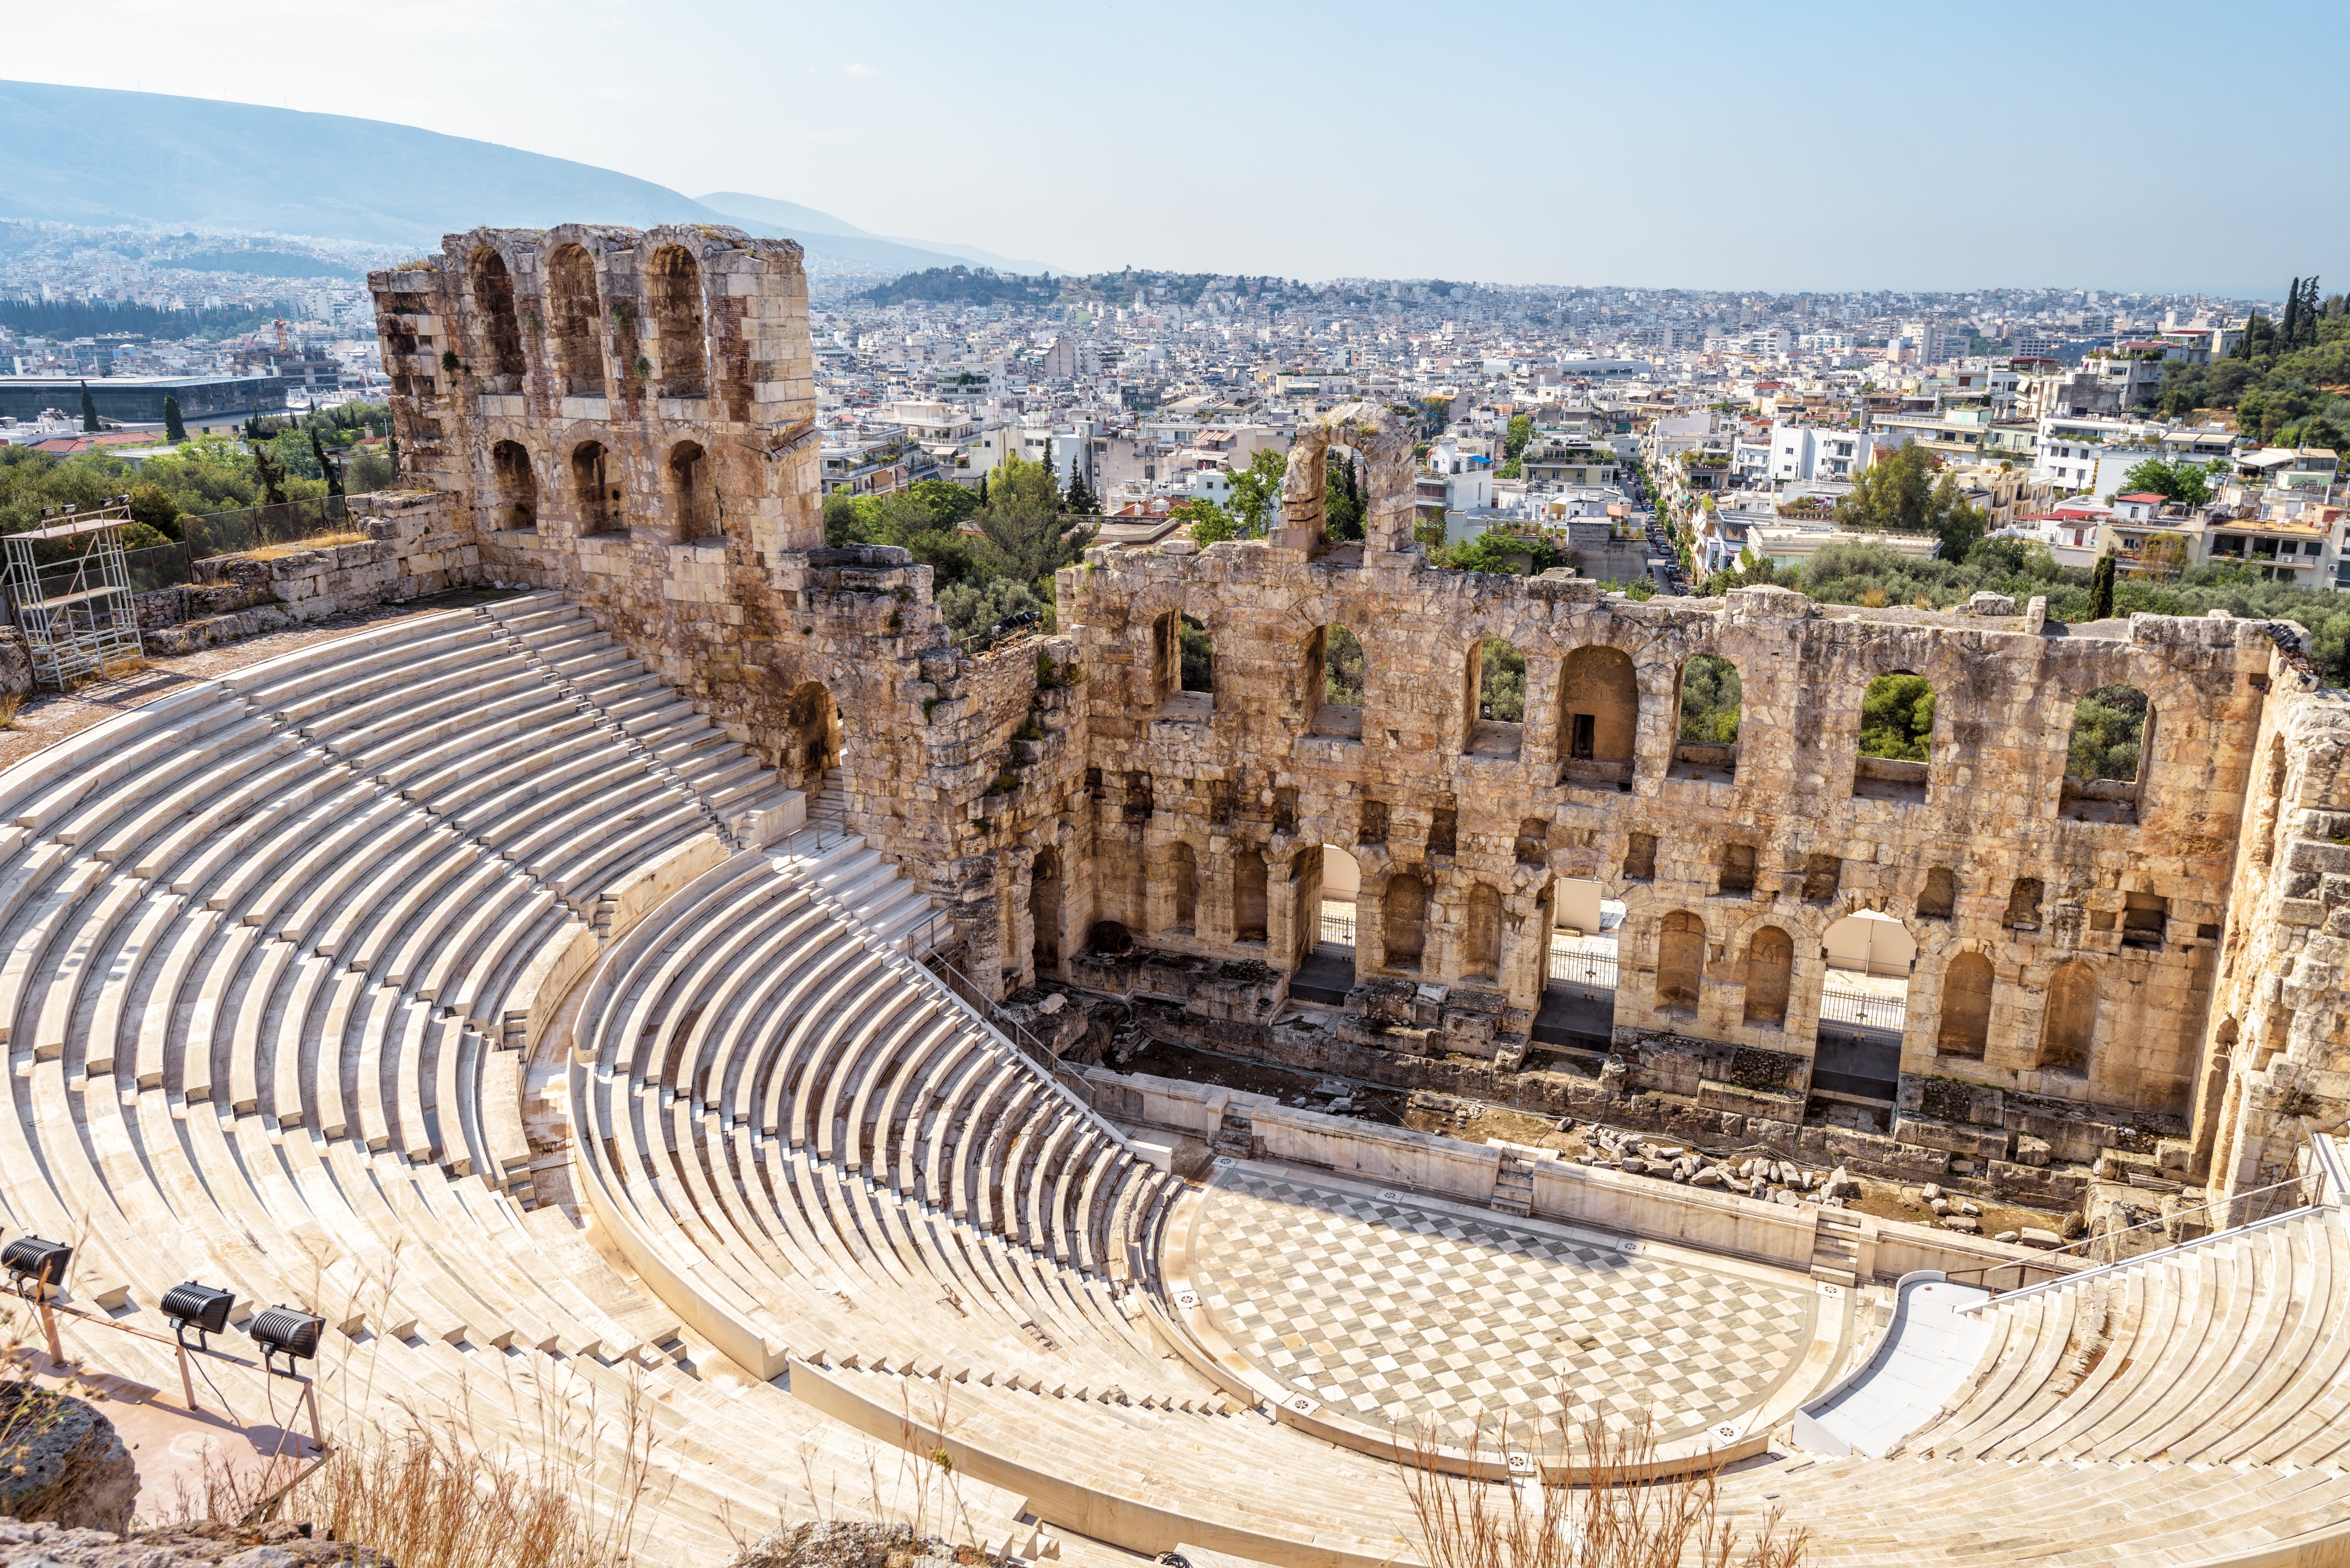 Plays studied in the BGSU classical civilization degree were first seen here at the Odeon of Herodes Atticus in Athens.